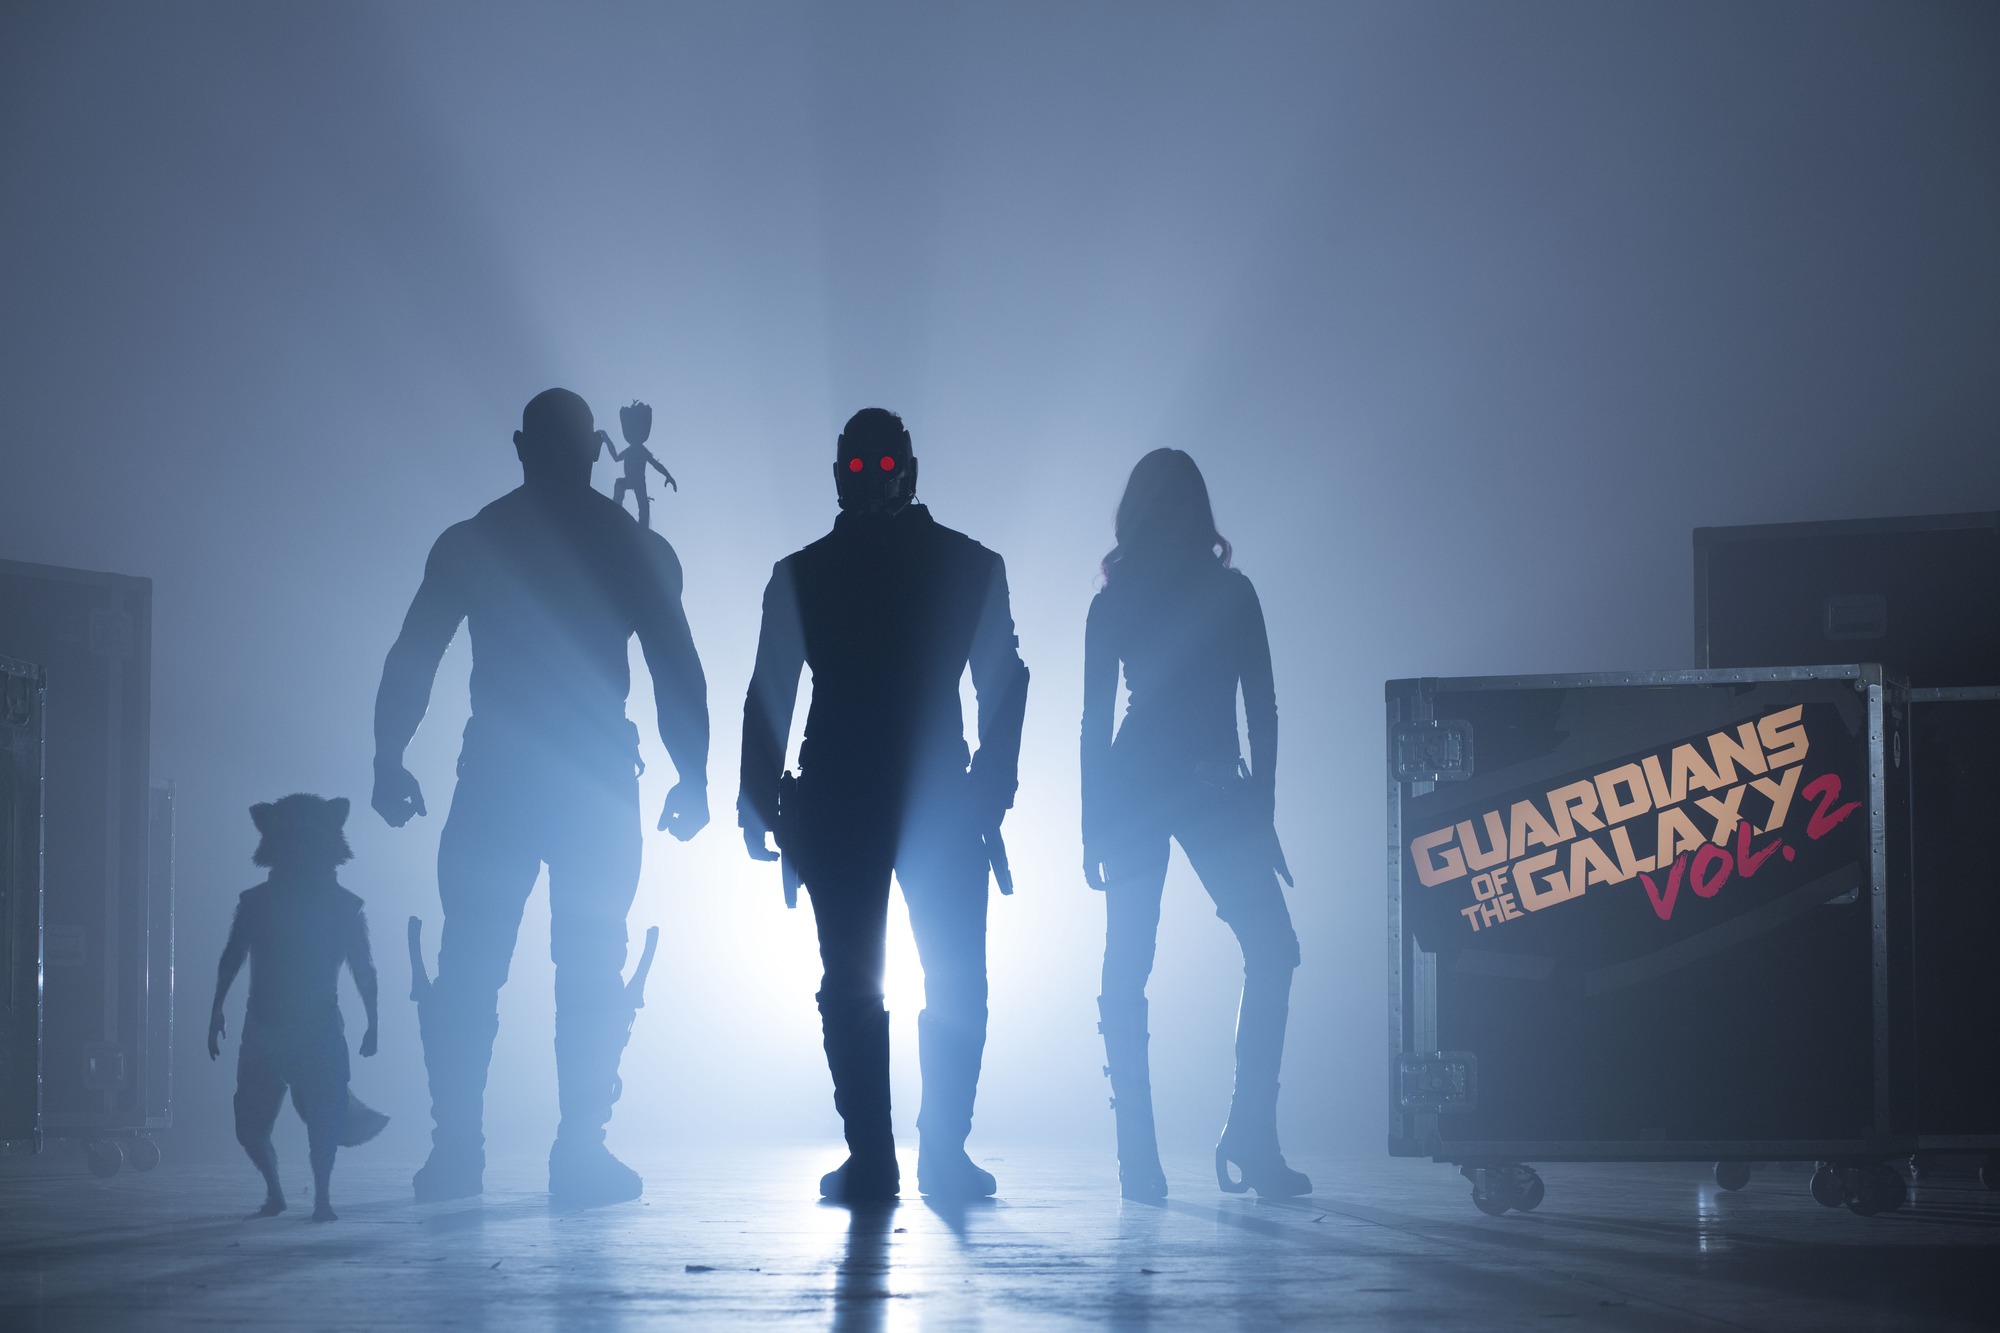 GUARDIANS OF THE GALAXY VOL. 2”